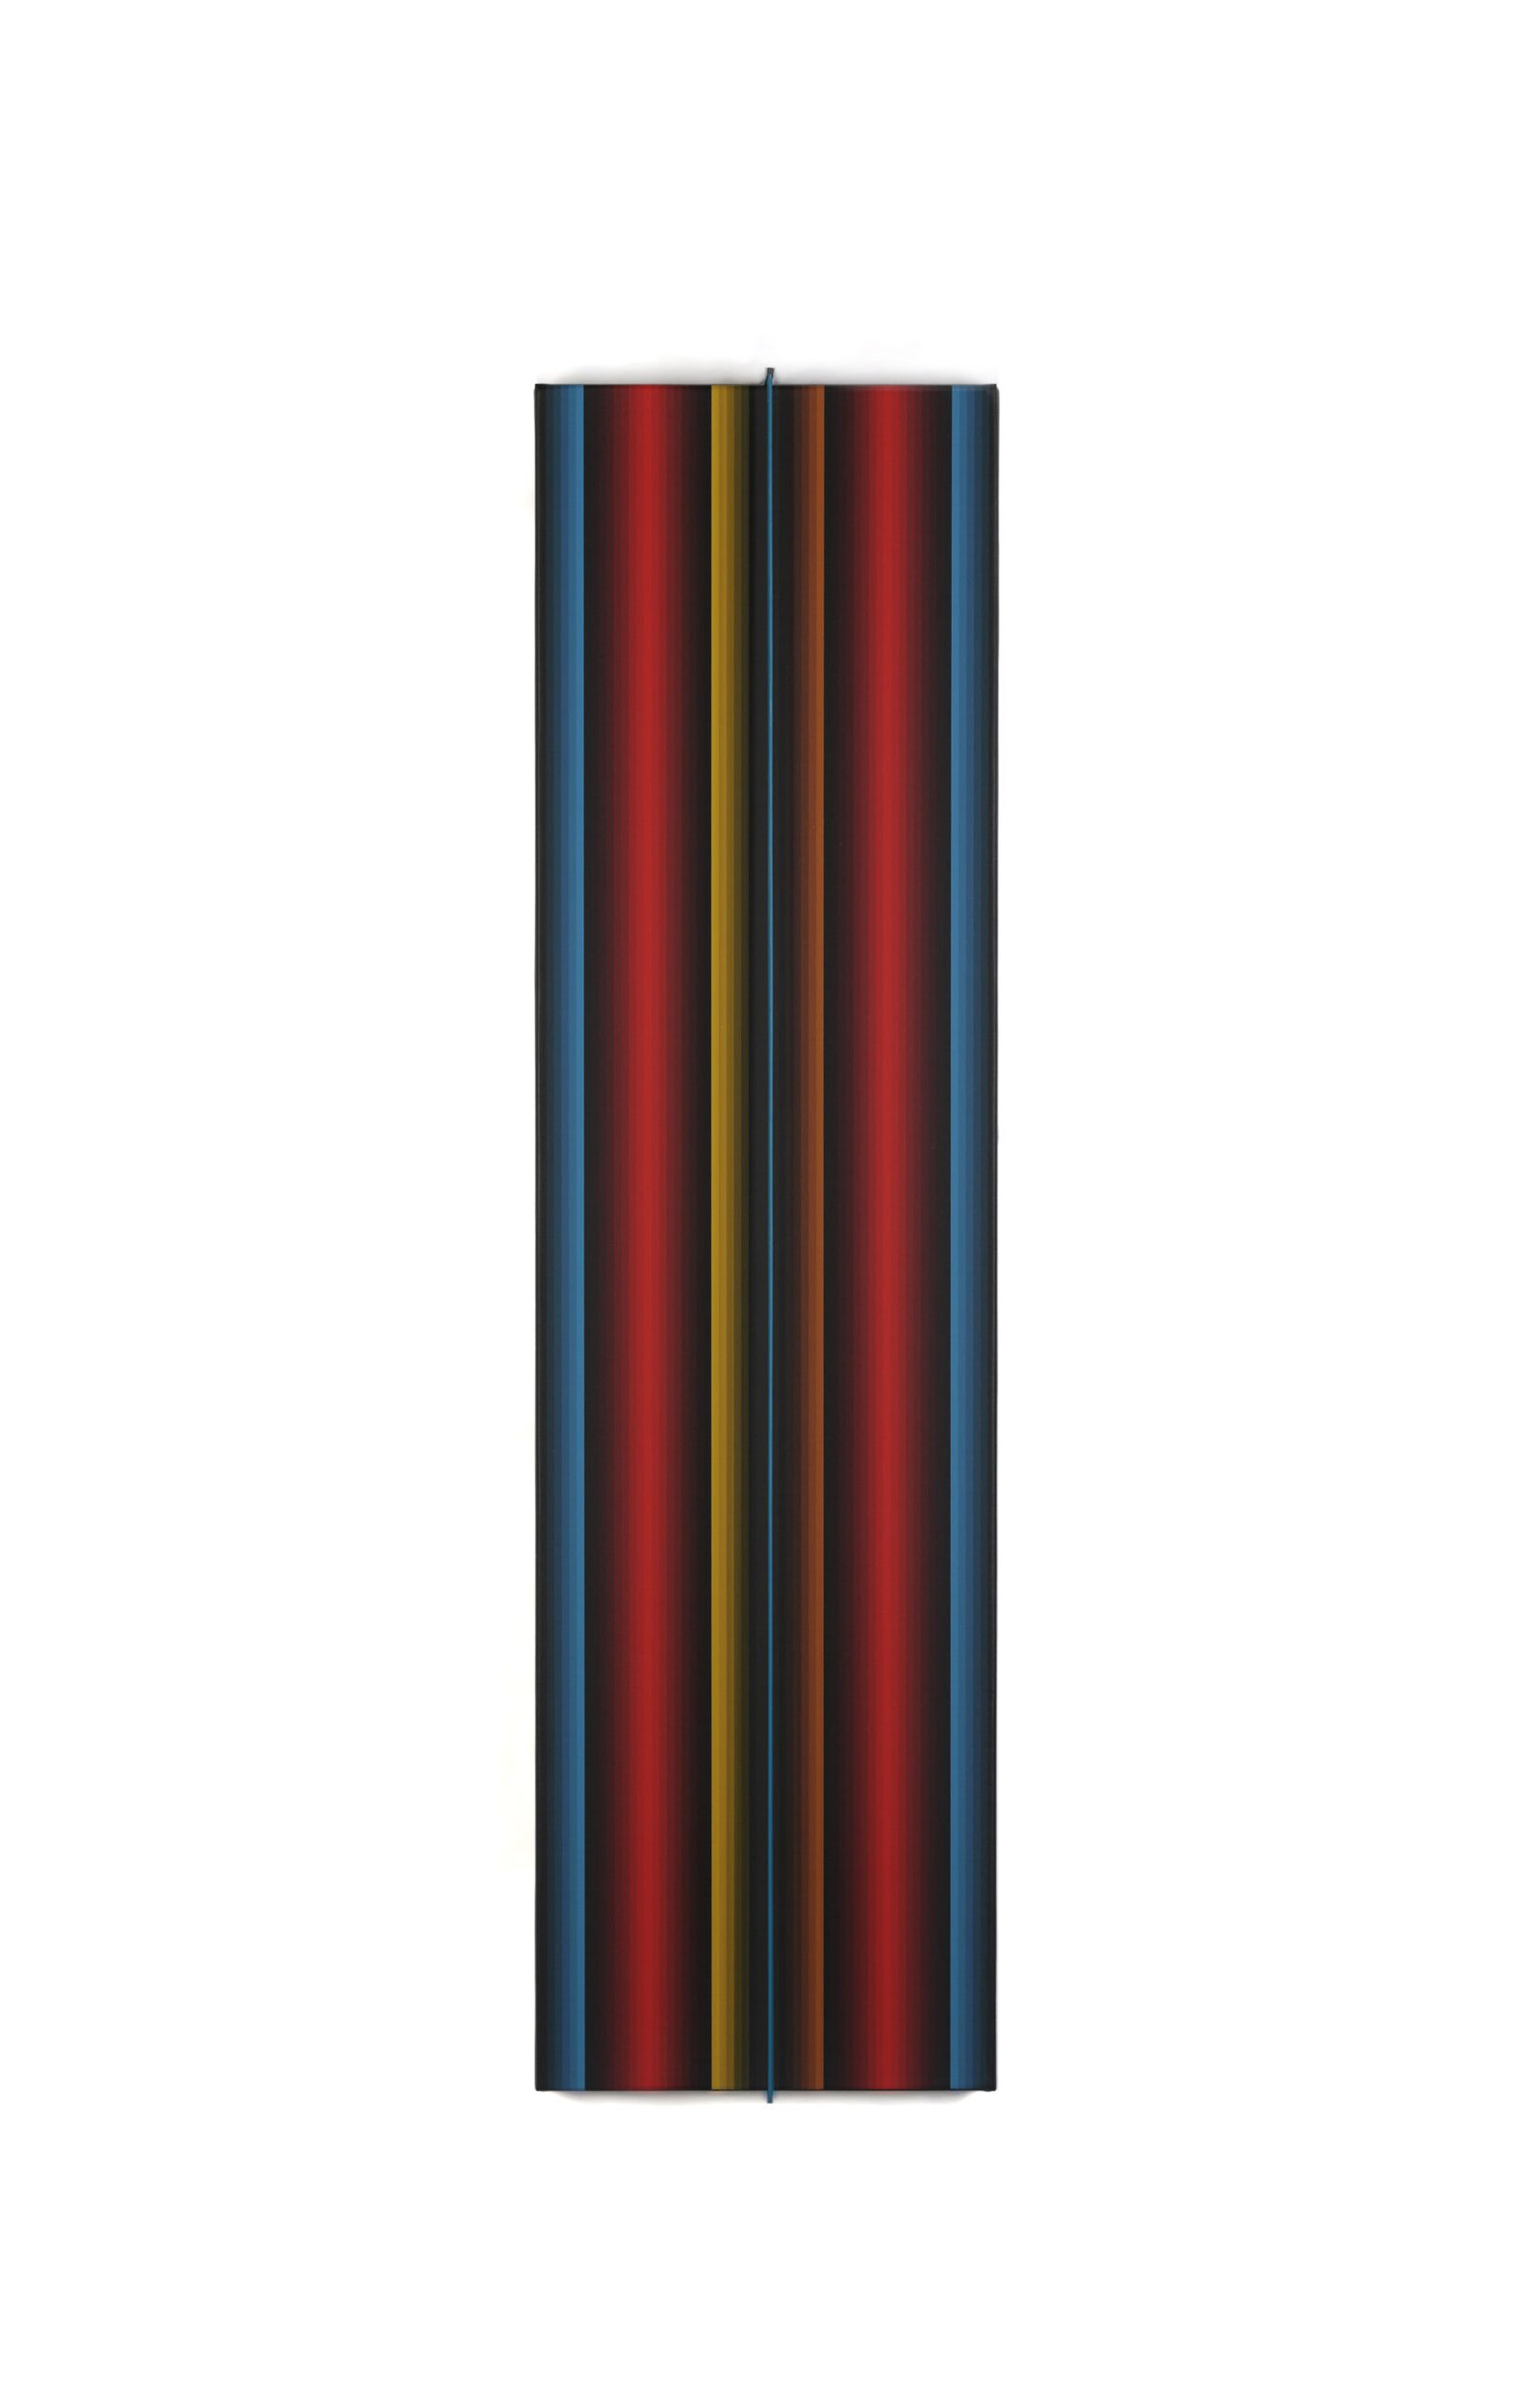 Prochromatique edition vertical 2 Canvas with steel colored steel bar 2012